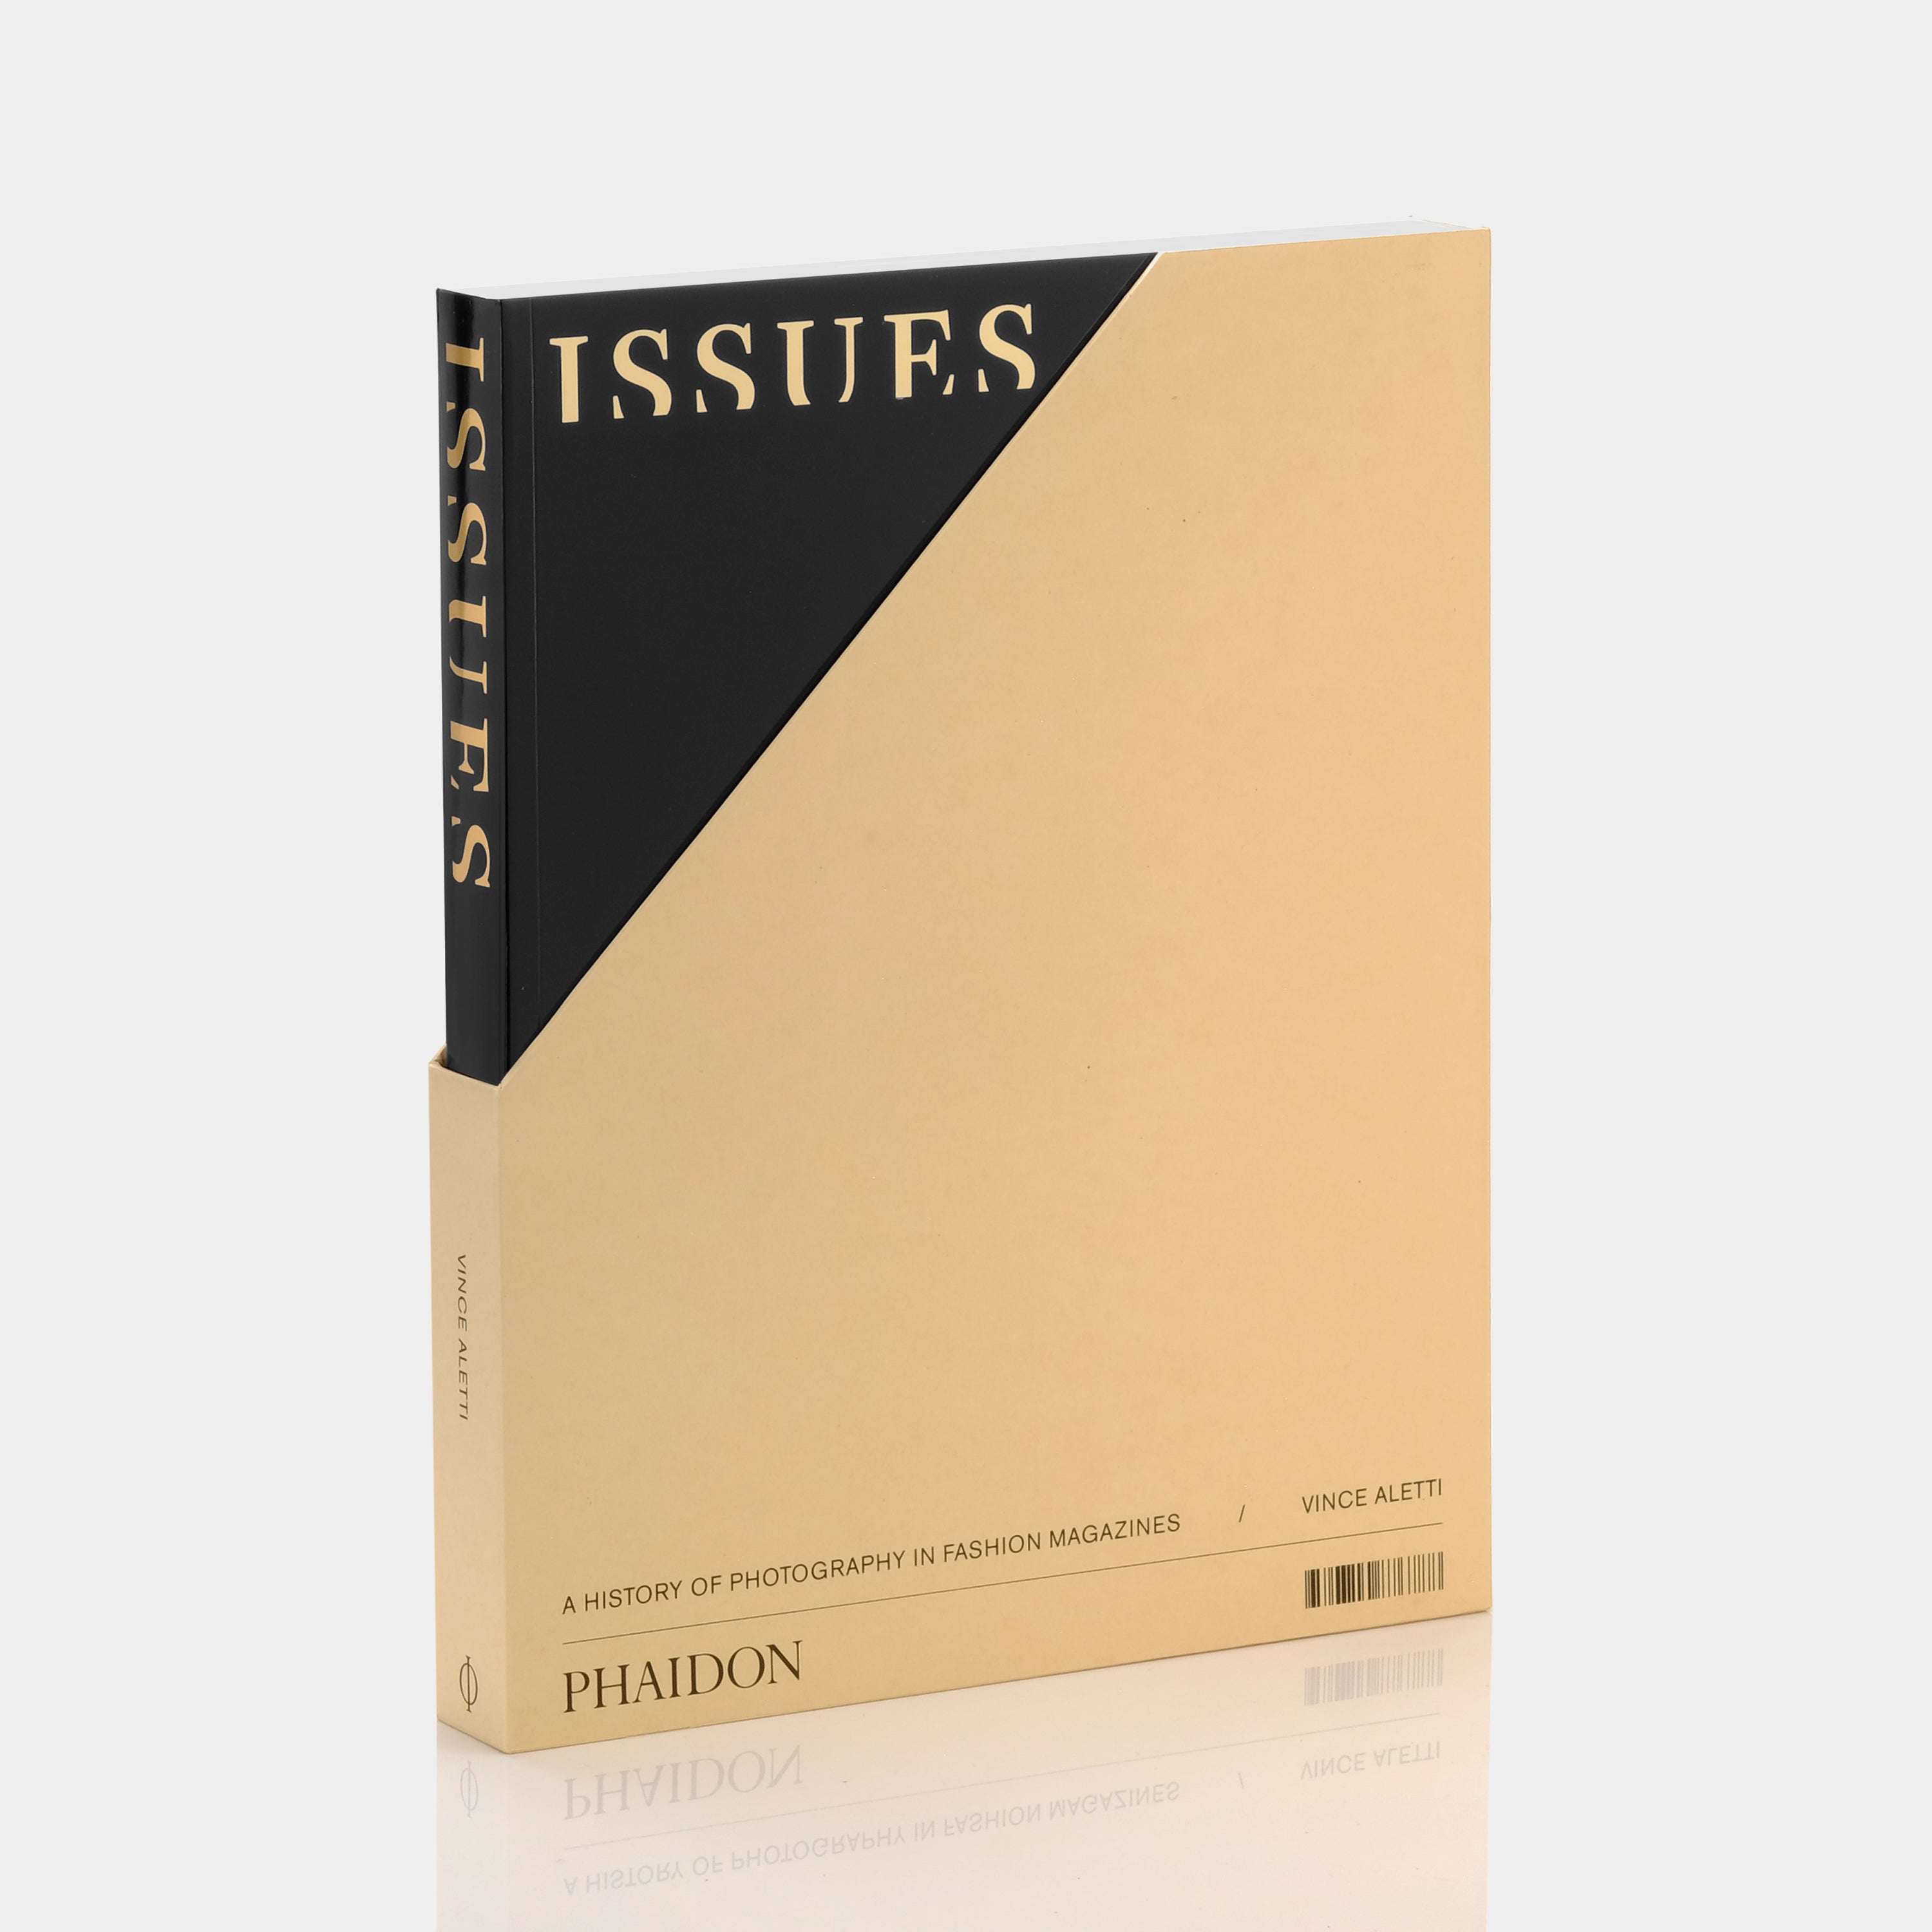 Issues: A History of Photography in Fashion Magazines Phaidon Book